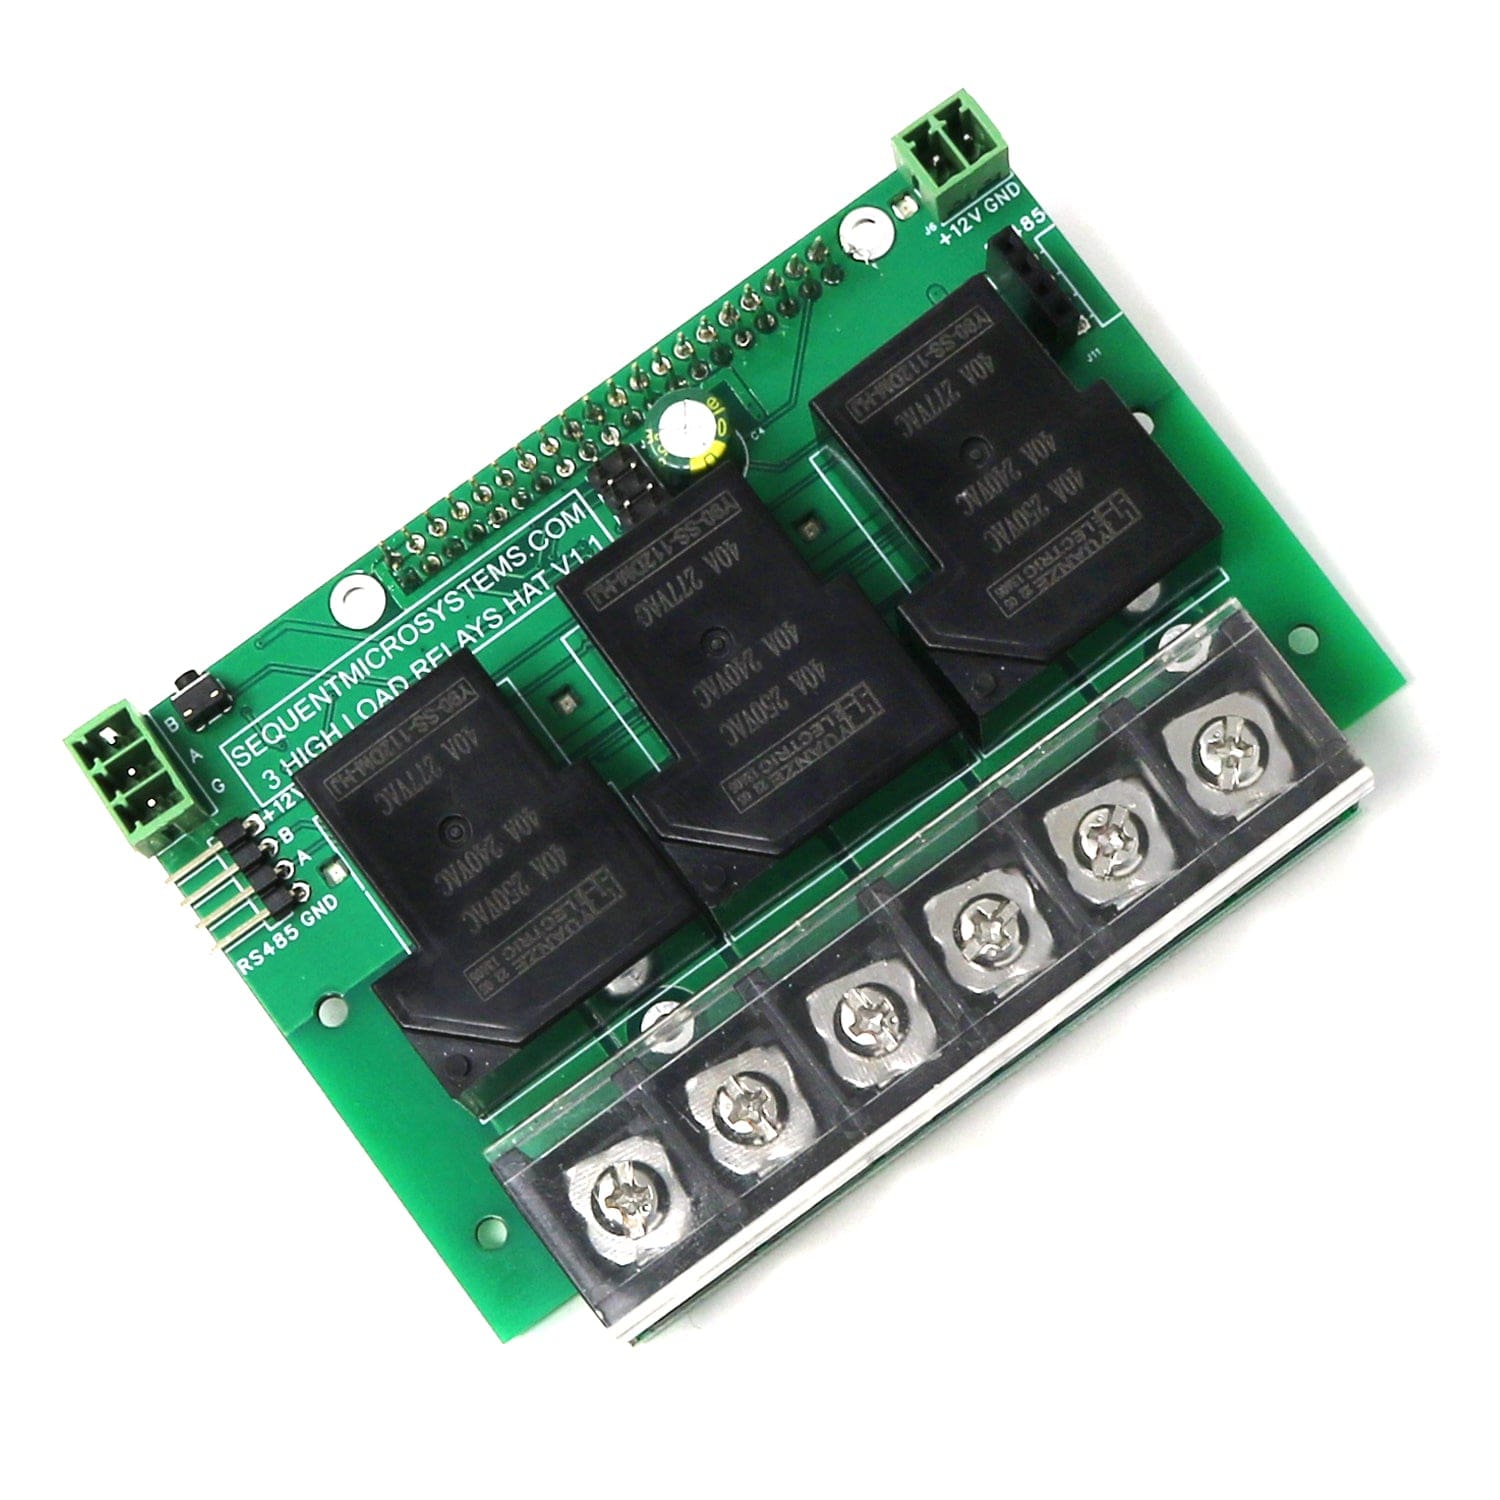 Three 40A/240V Relays RS485 Daisy-chainable HAT for Raspberry Pi - The Pi Hut